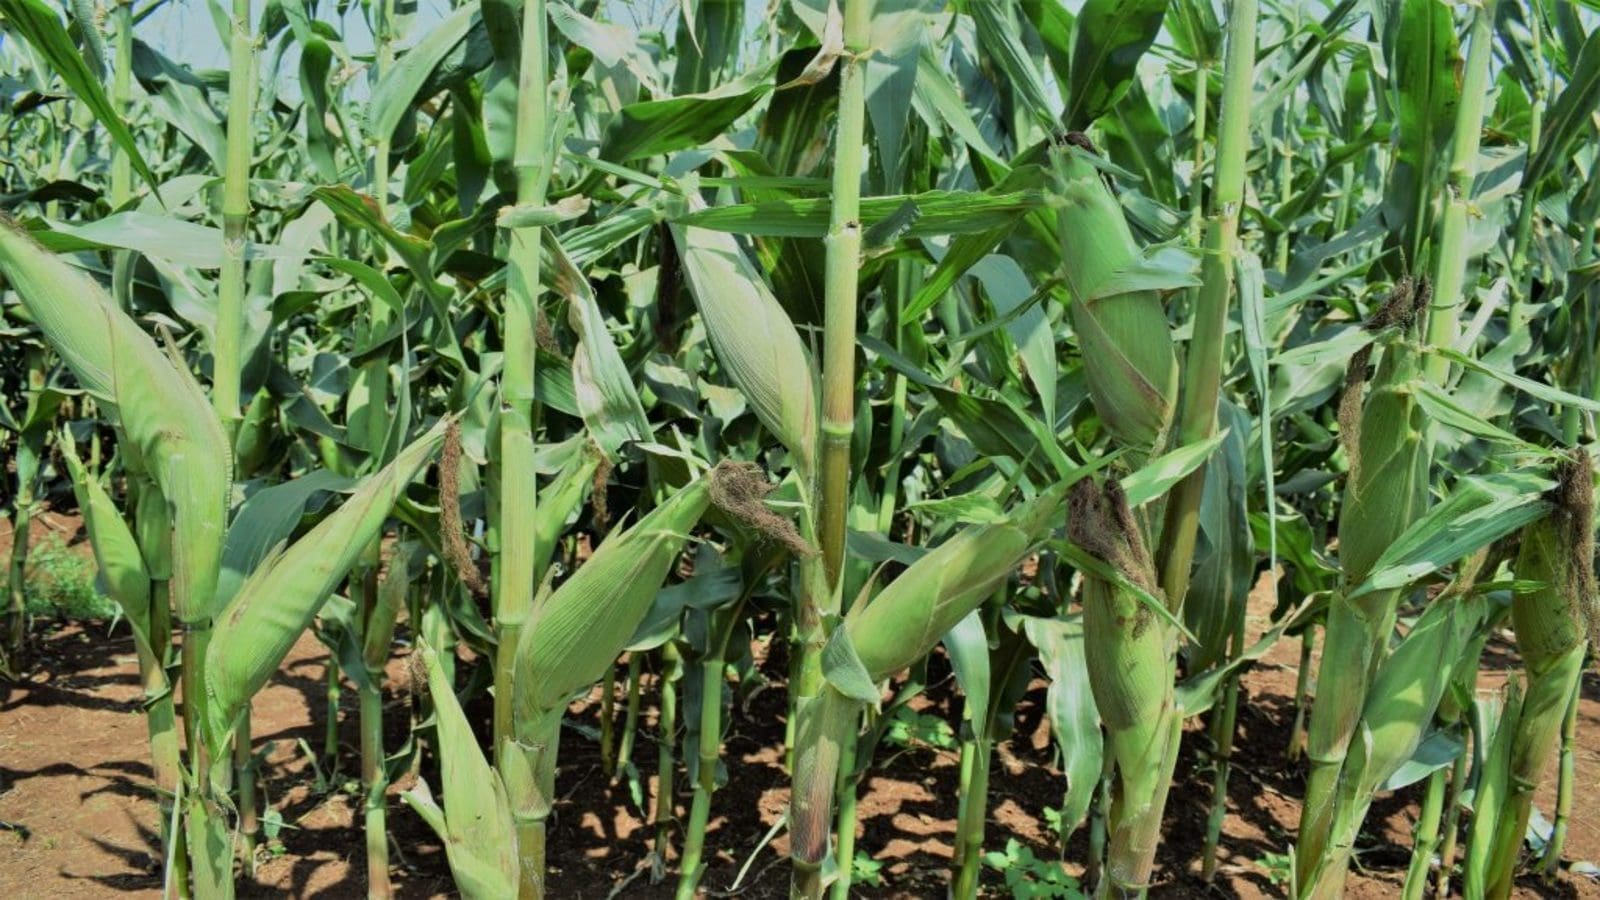 Zambia allocates 20,000 hectares of farmland to Kenya maize growers to boost local supplies